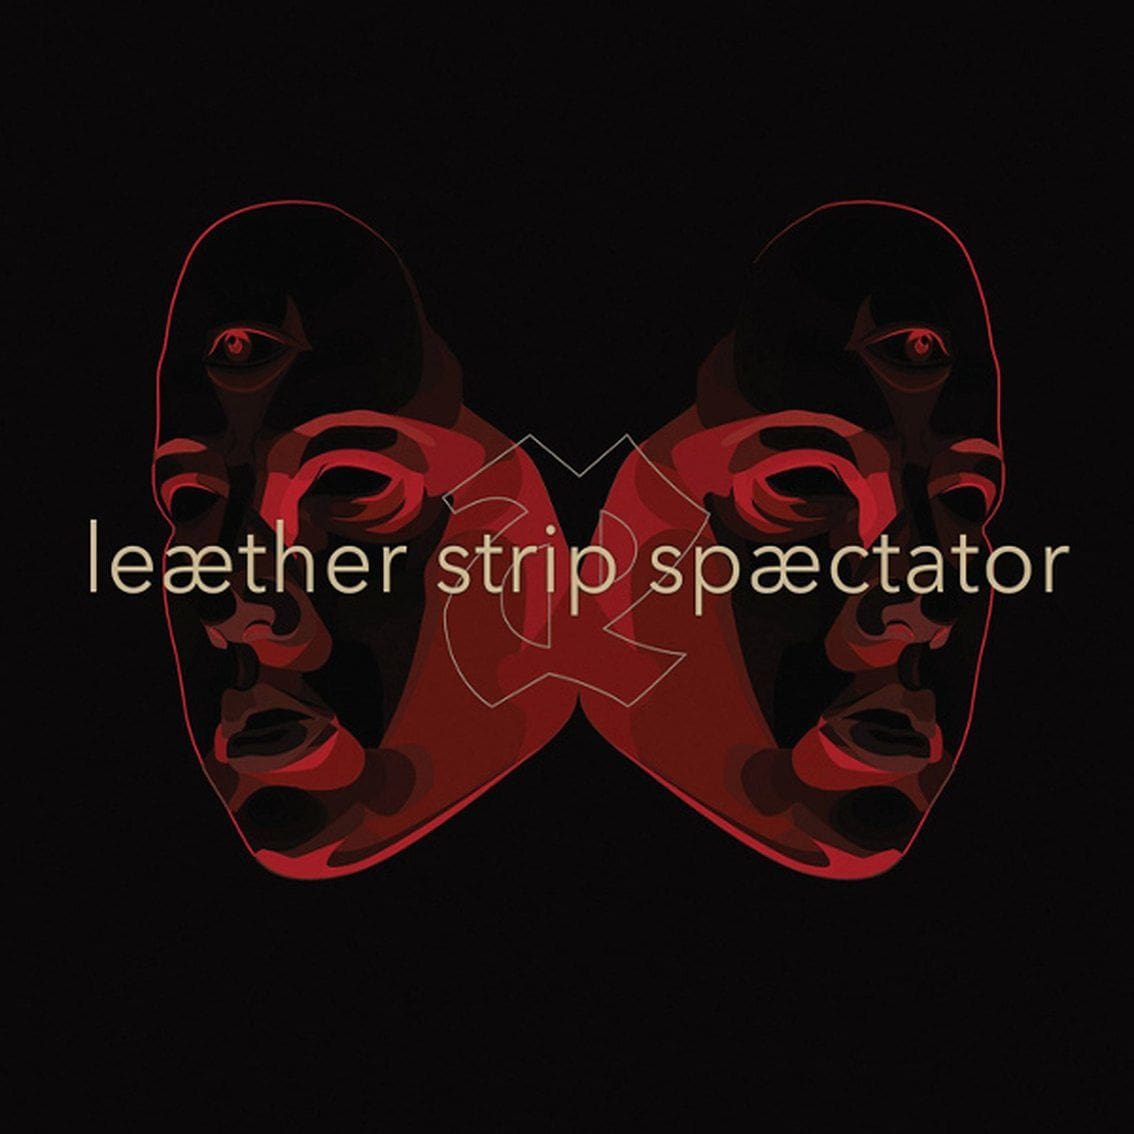 Leaether Strip launches 'Spectator' album on 2CD and vinyl - get your orders in now